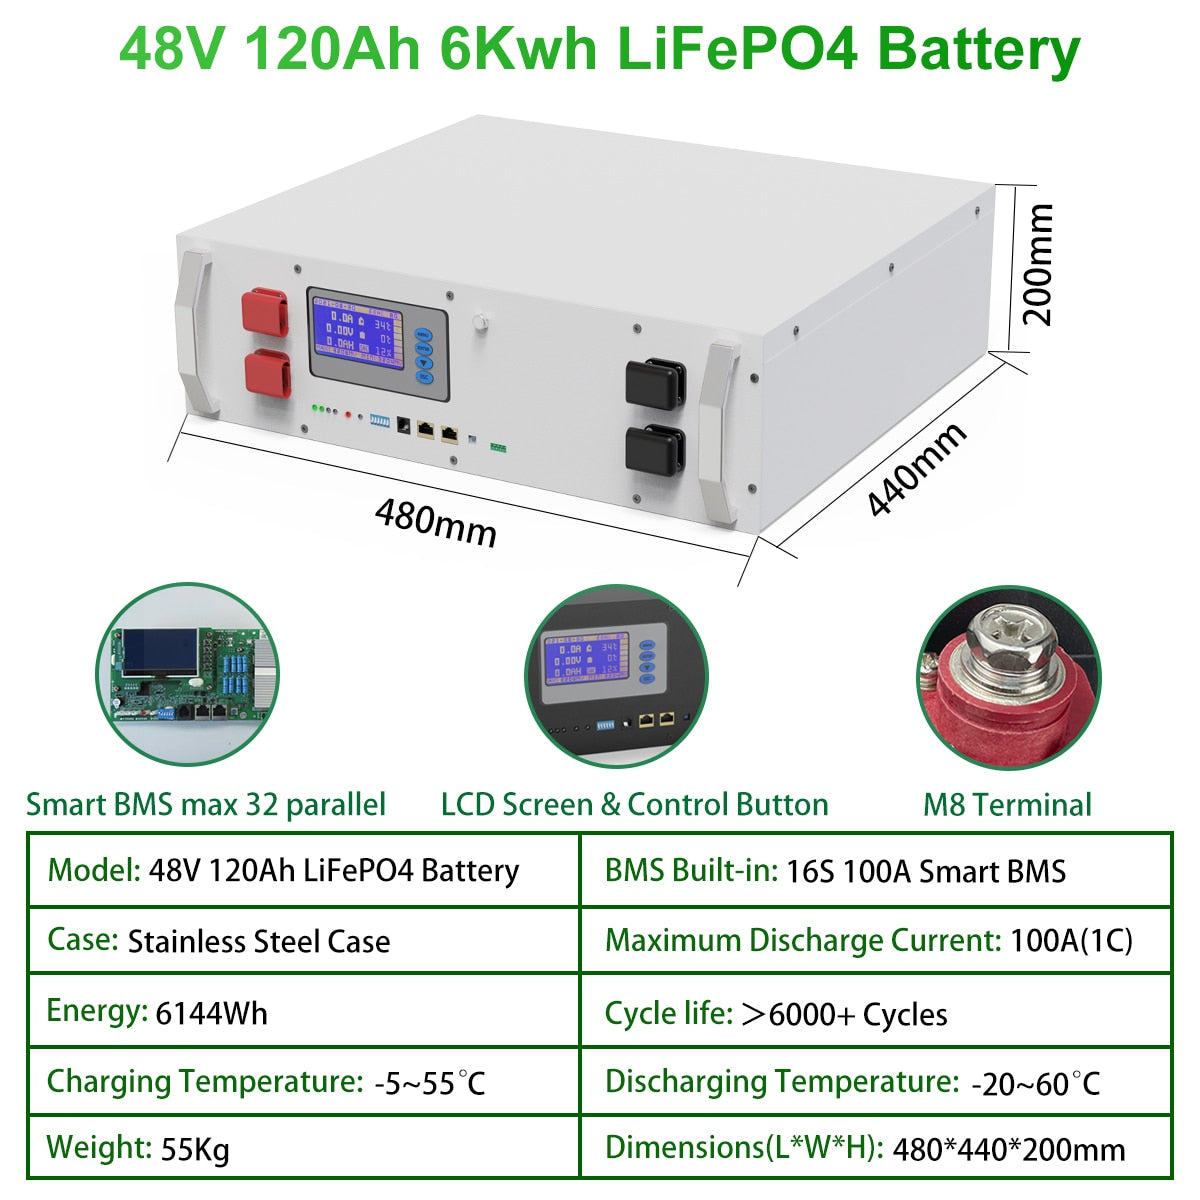 Pacco batterie LiFePO4 48V 120Ah 6000 cicli 6.14KWH RS485 CAN PC Monitor 16S BMS 51.2V 100Ah 200Ah PV Off/On Gird Inverter Batteria